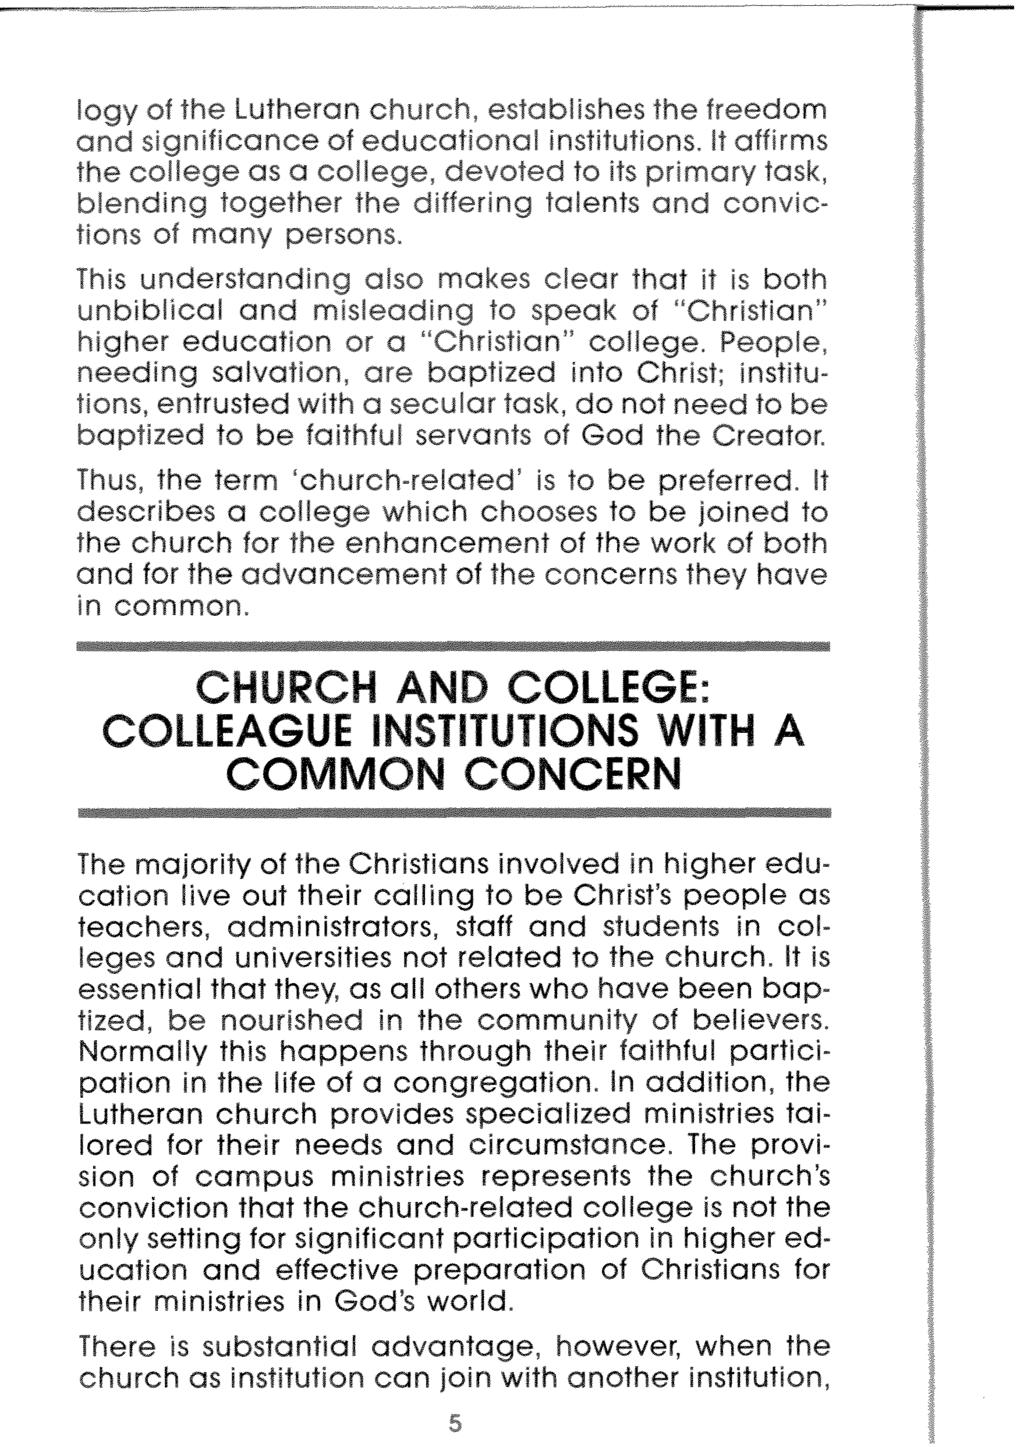 CHURCH AND COLLEGE: COLLEAGUE INSTITUTIONS WITH A COMMON CONCERN majority of Christians involved higher cation I out their calling to be Christ's people as teachers, administrators, staff and in and